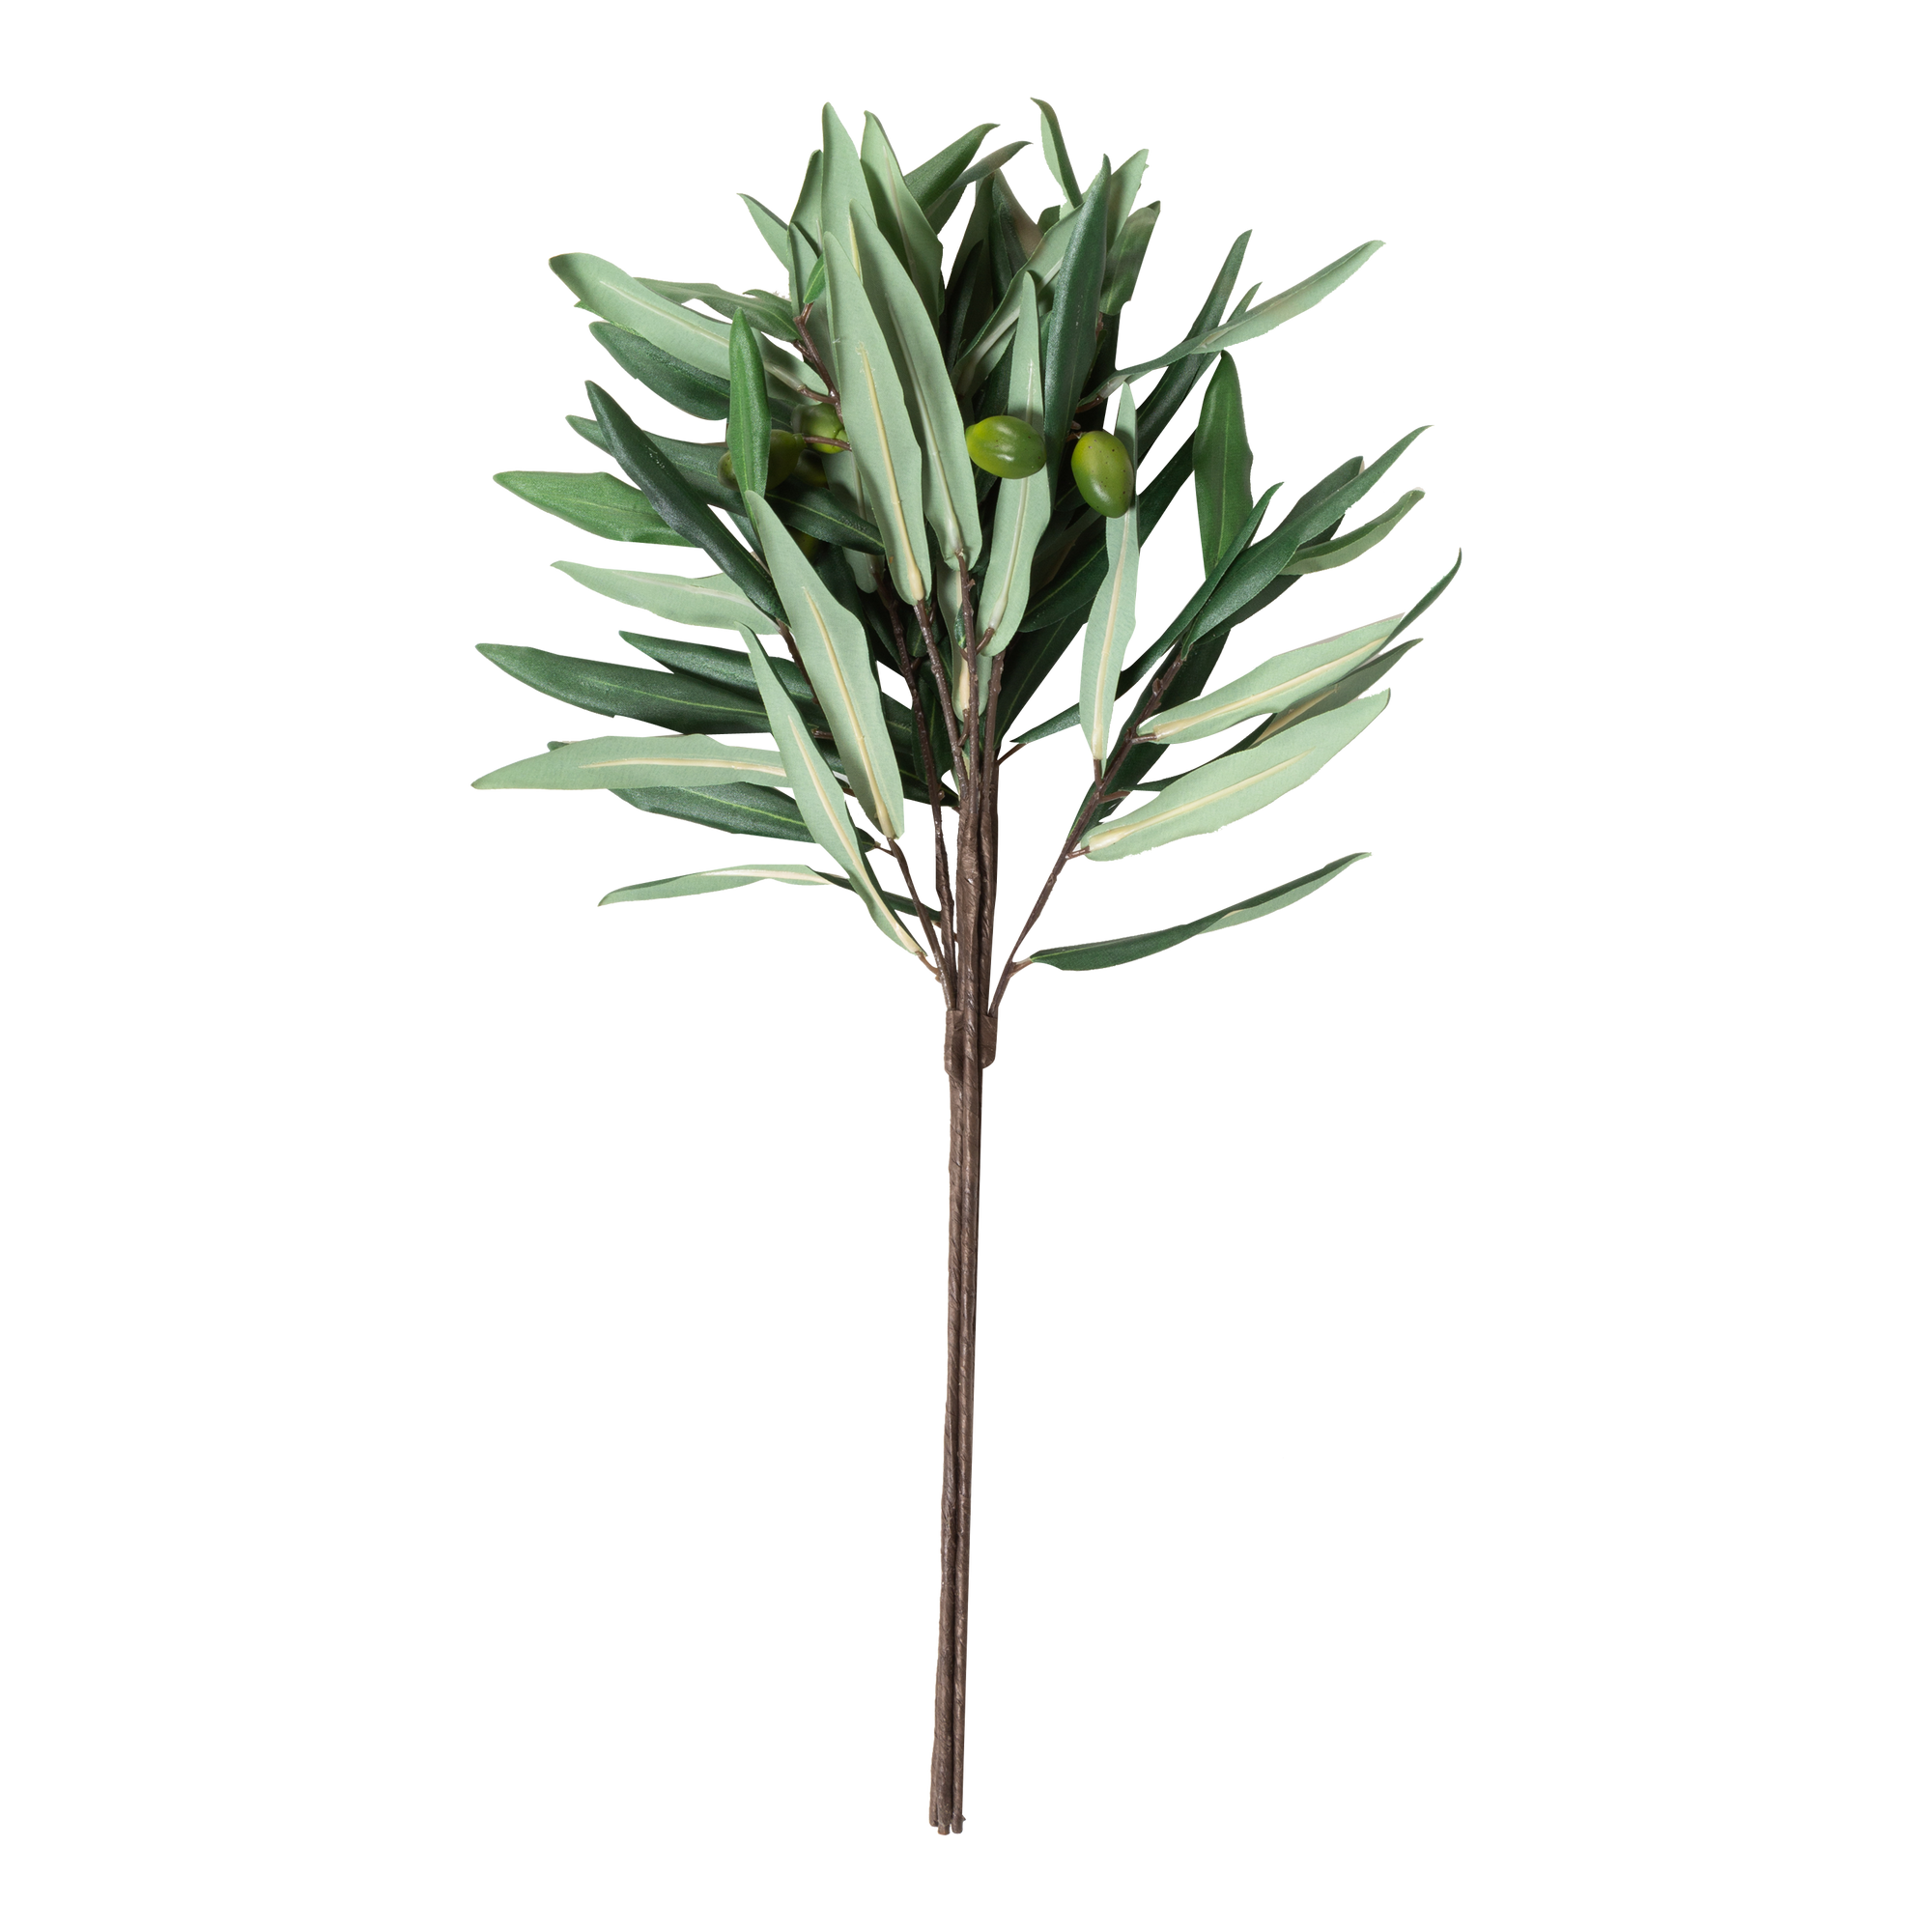 Elevating the atmosphere in your indoor rooms with a natural green touch without the necessity of care, the Olive Branch provides an elegant, slender body with an abundance of perf